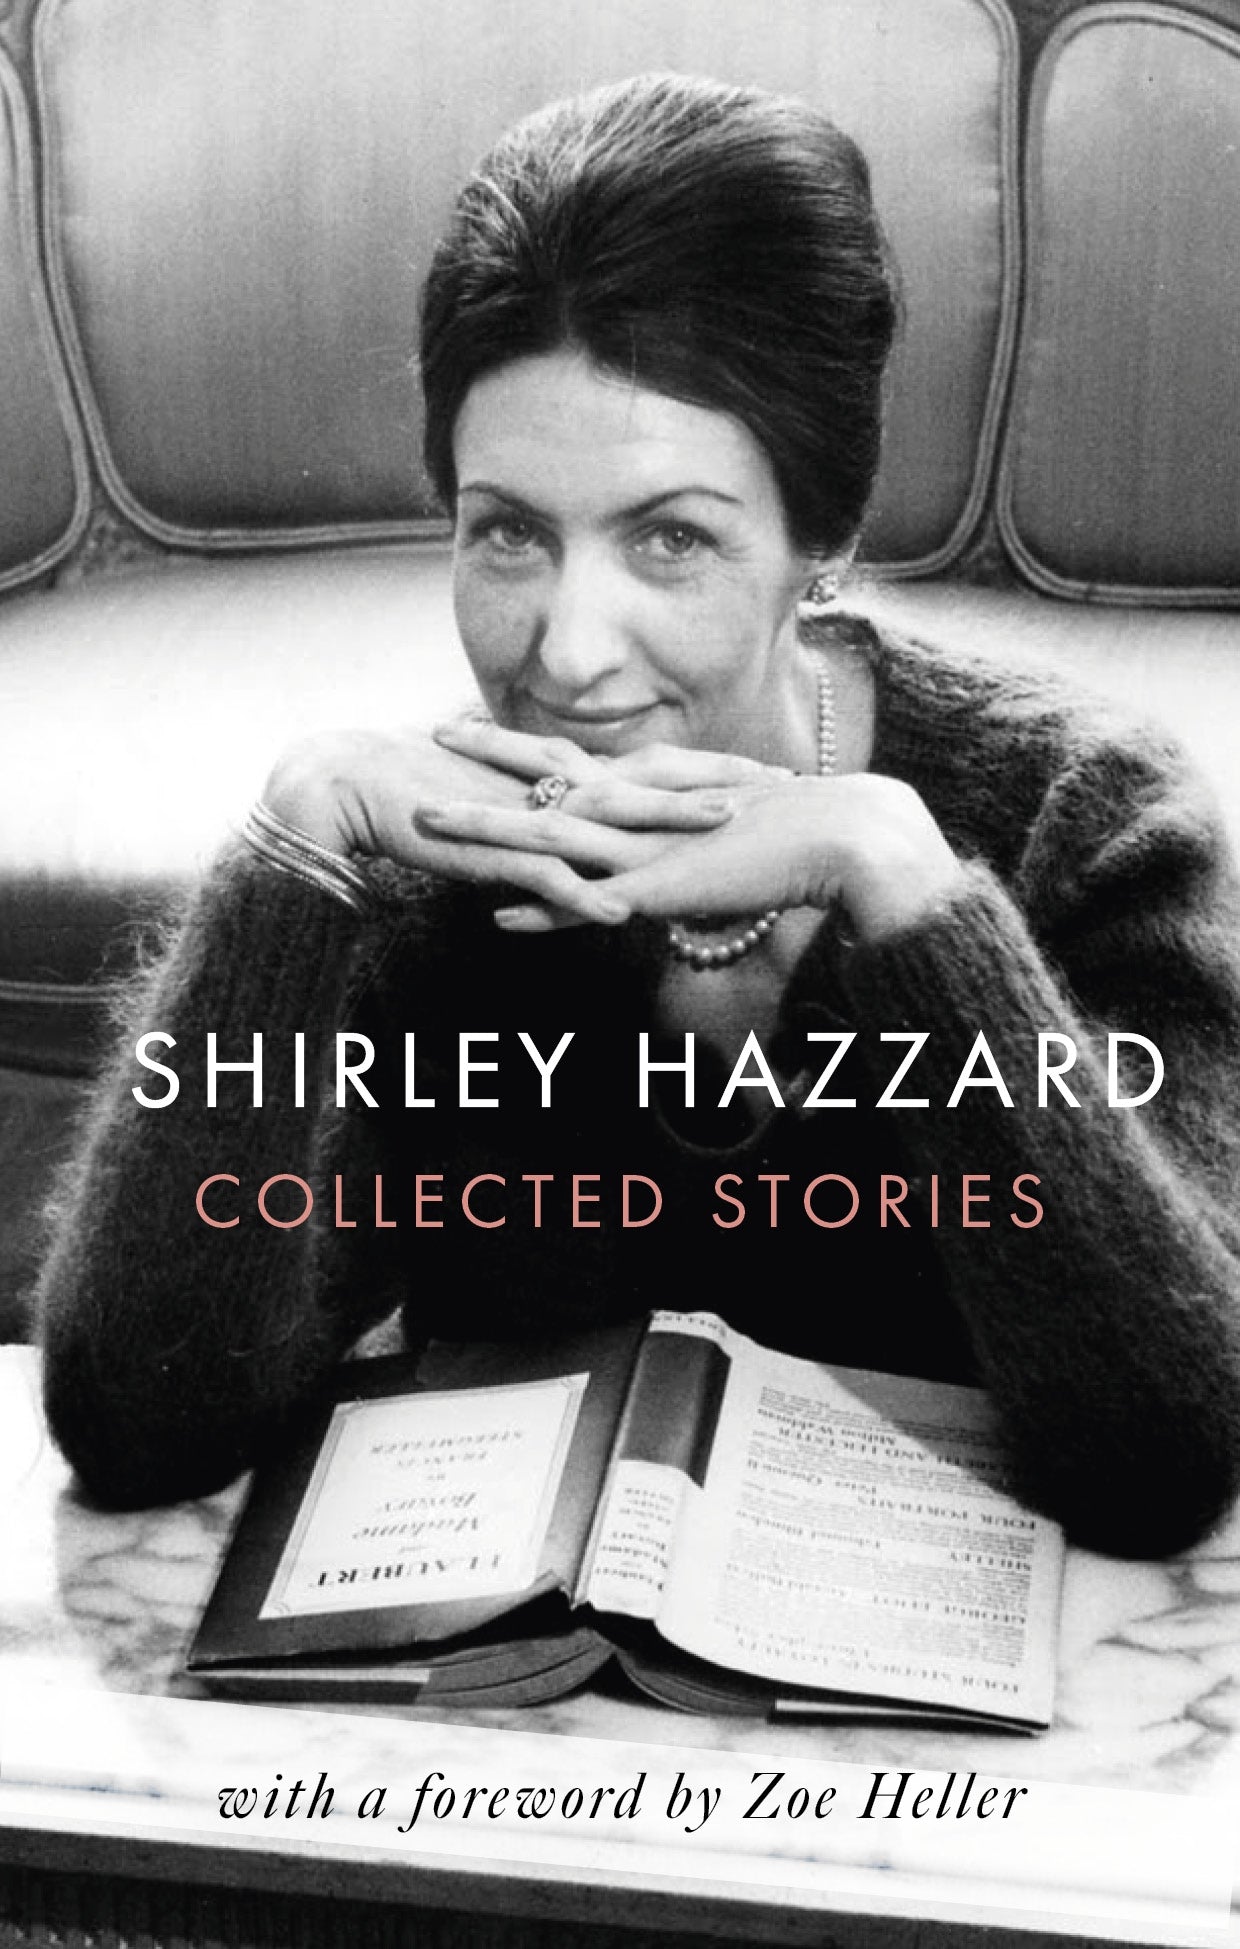 The Collected Stories of Shirley Hazzard by Shirley Hazzard